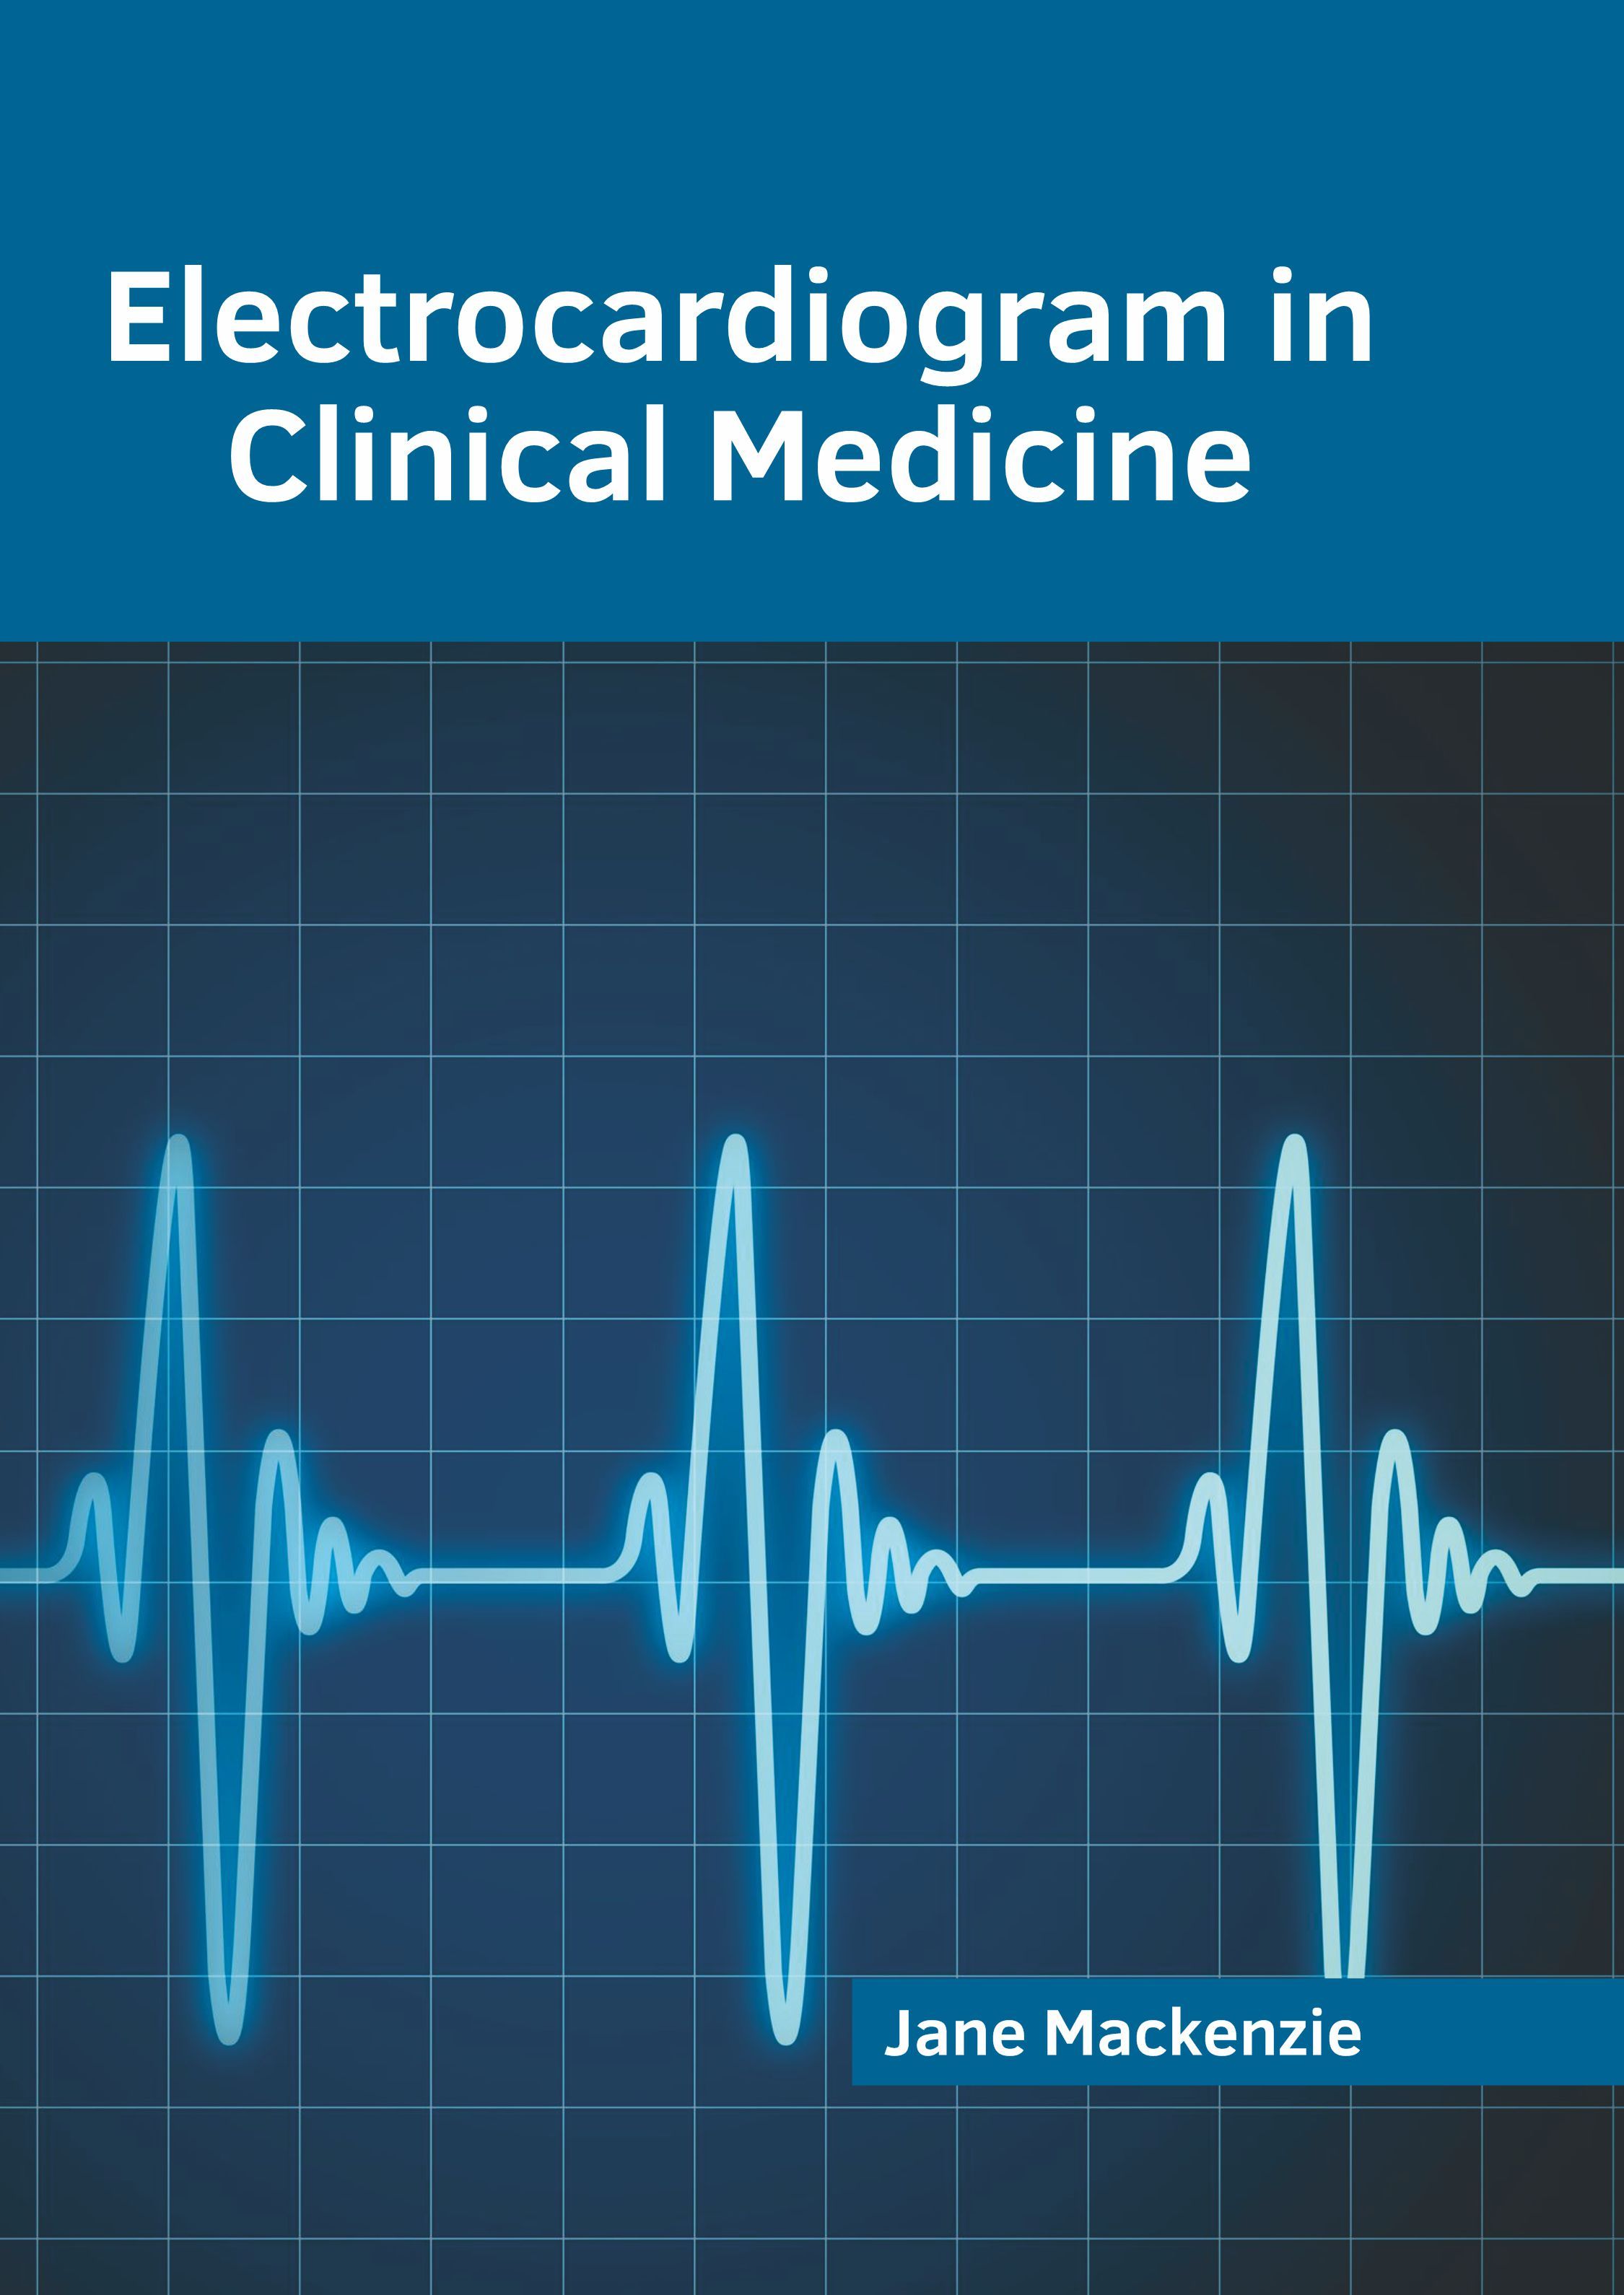 

exclusive-publishers/american-medical-publishers/electrocardiogram-in-clinical-medicine-9781639270279